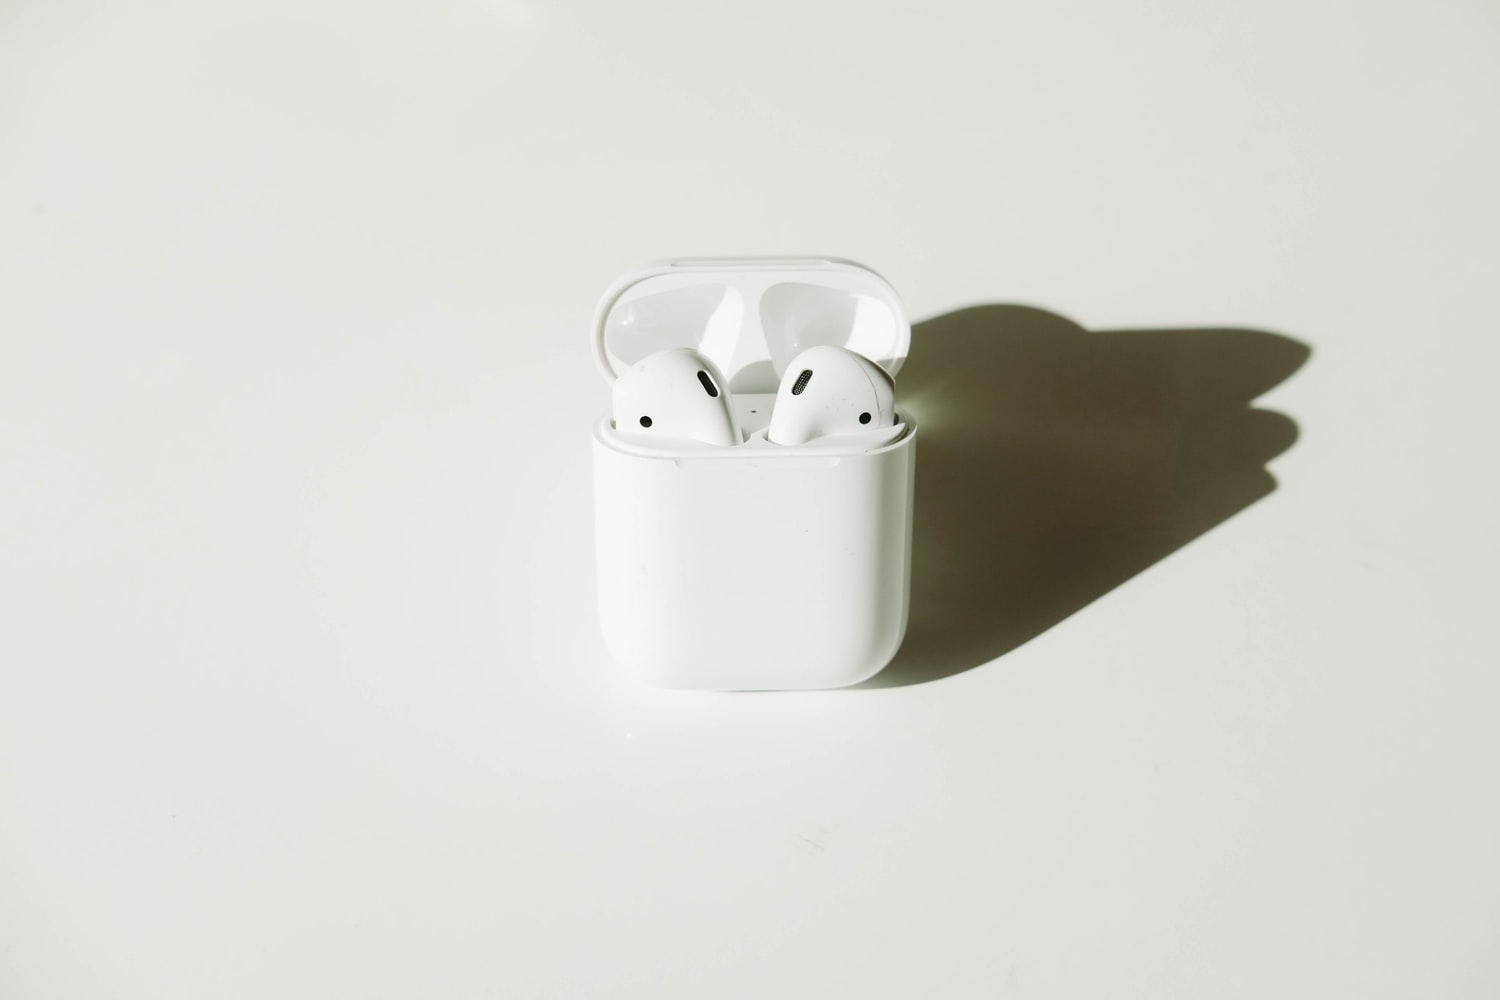 Airpods sit in their case and have a shadow. The picture has a white background.